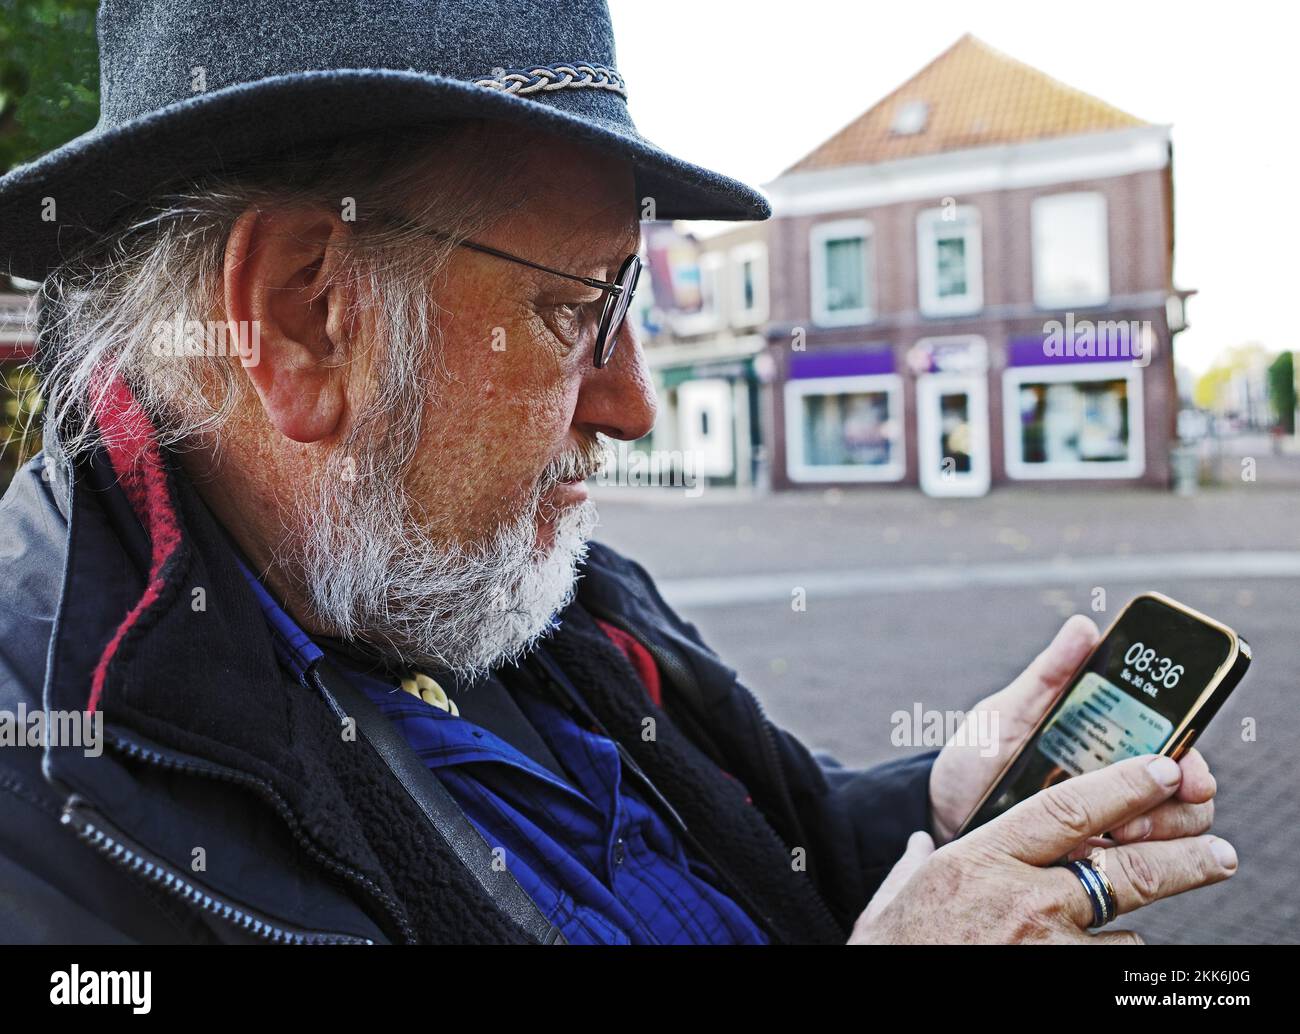 Elderly man with hat is checking his smartphone. He is in the middle of the historical town of Coevorden in the Netherlands Stock Photo